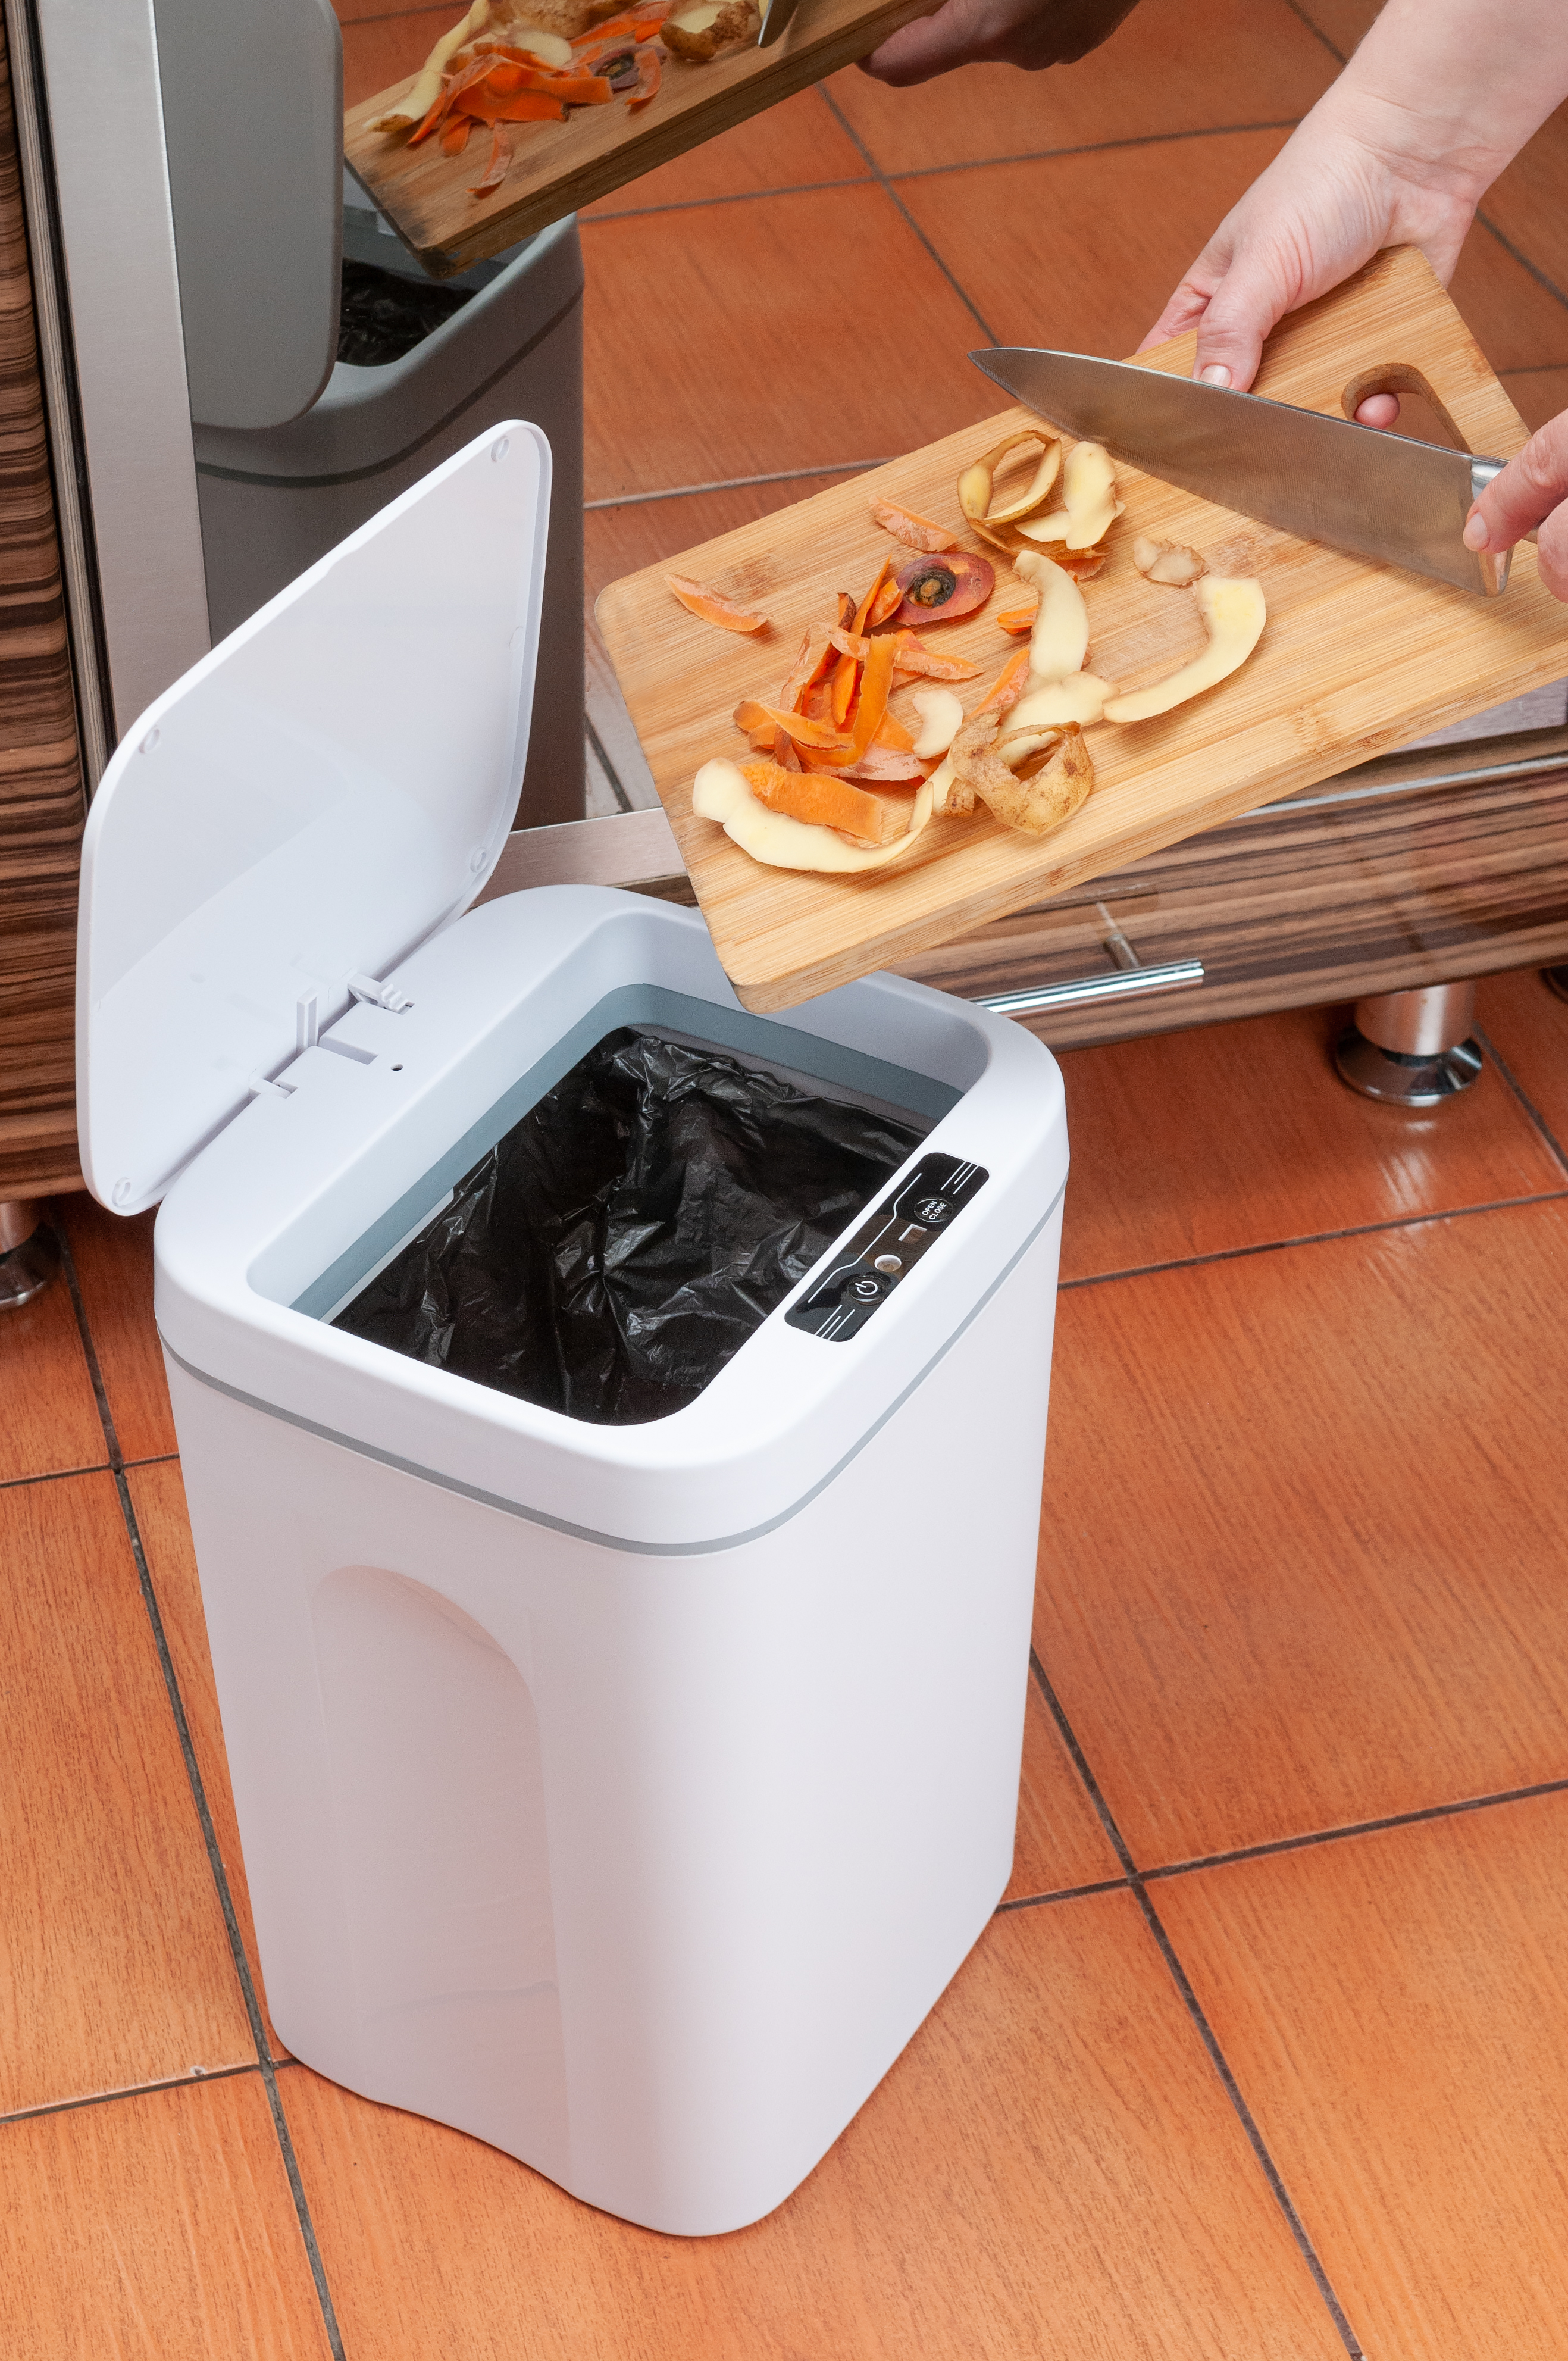 What is the warranty on this product? – simplehuman